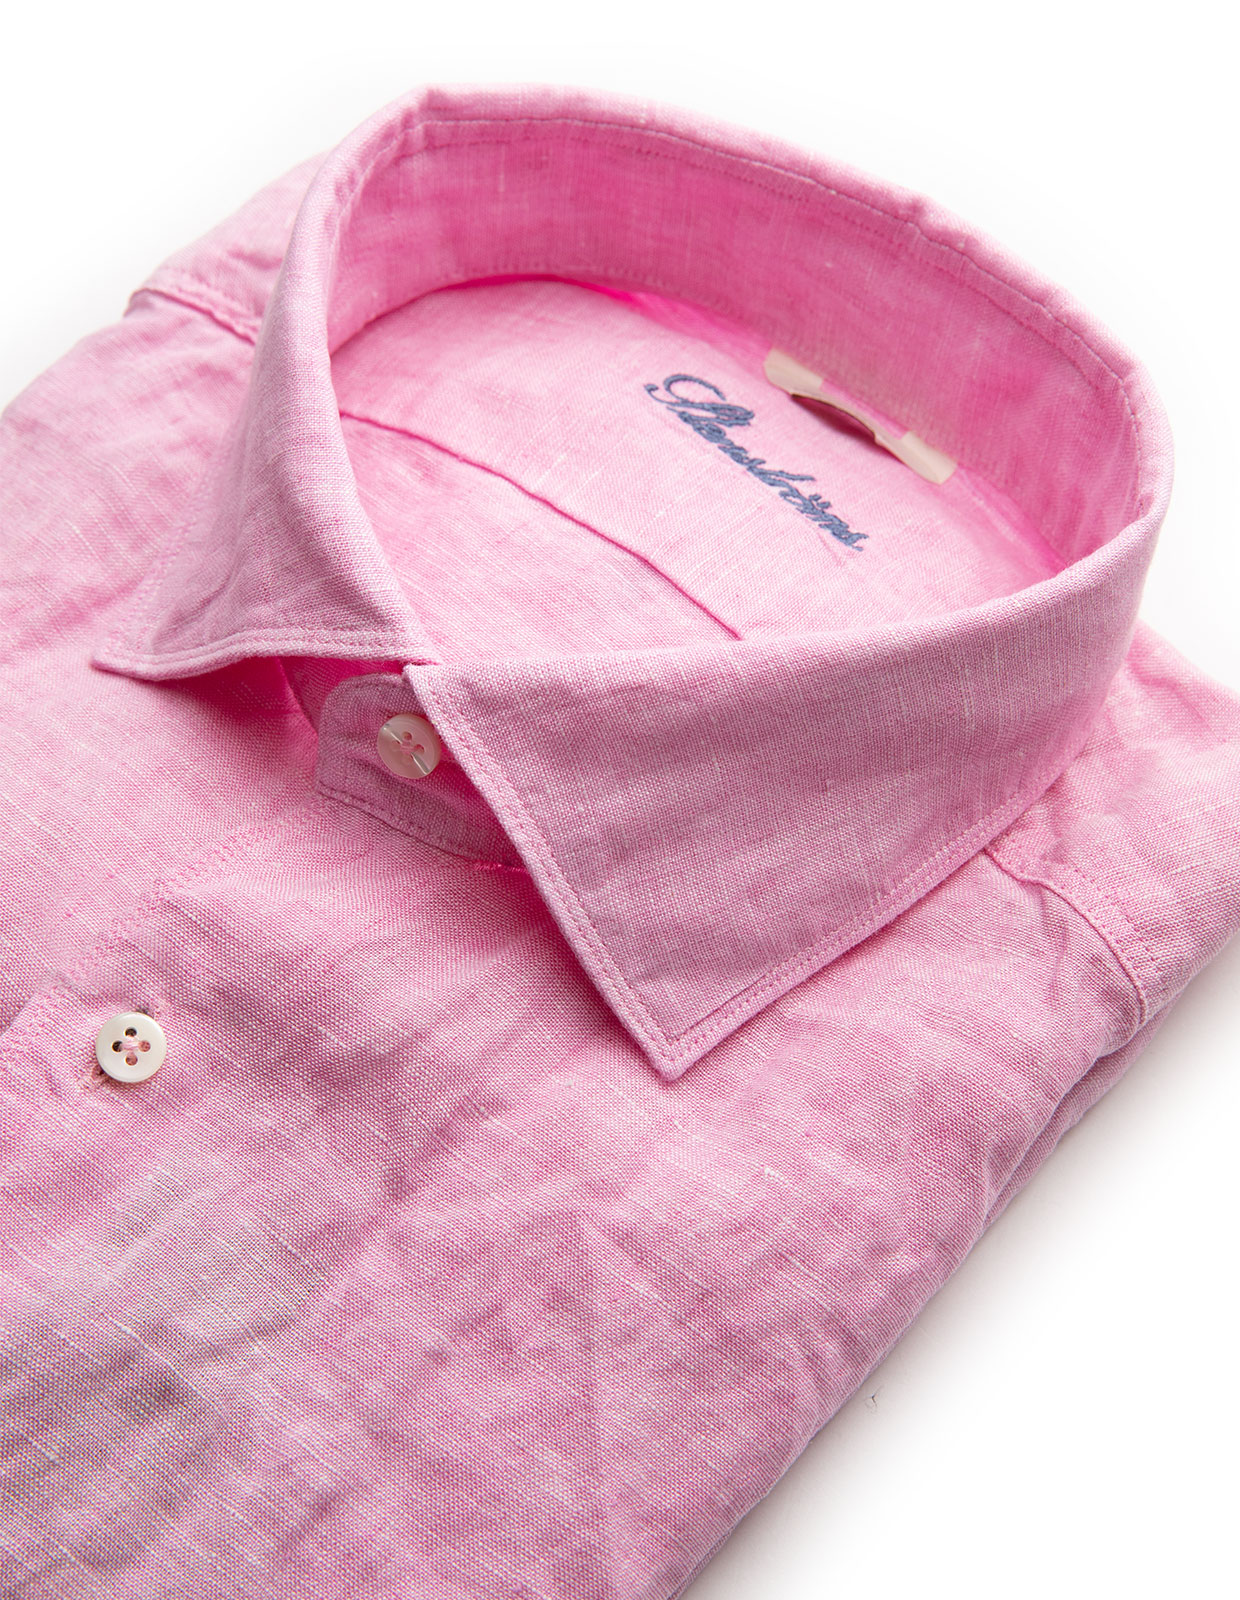 Fitted Body Linen Shirt Pink